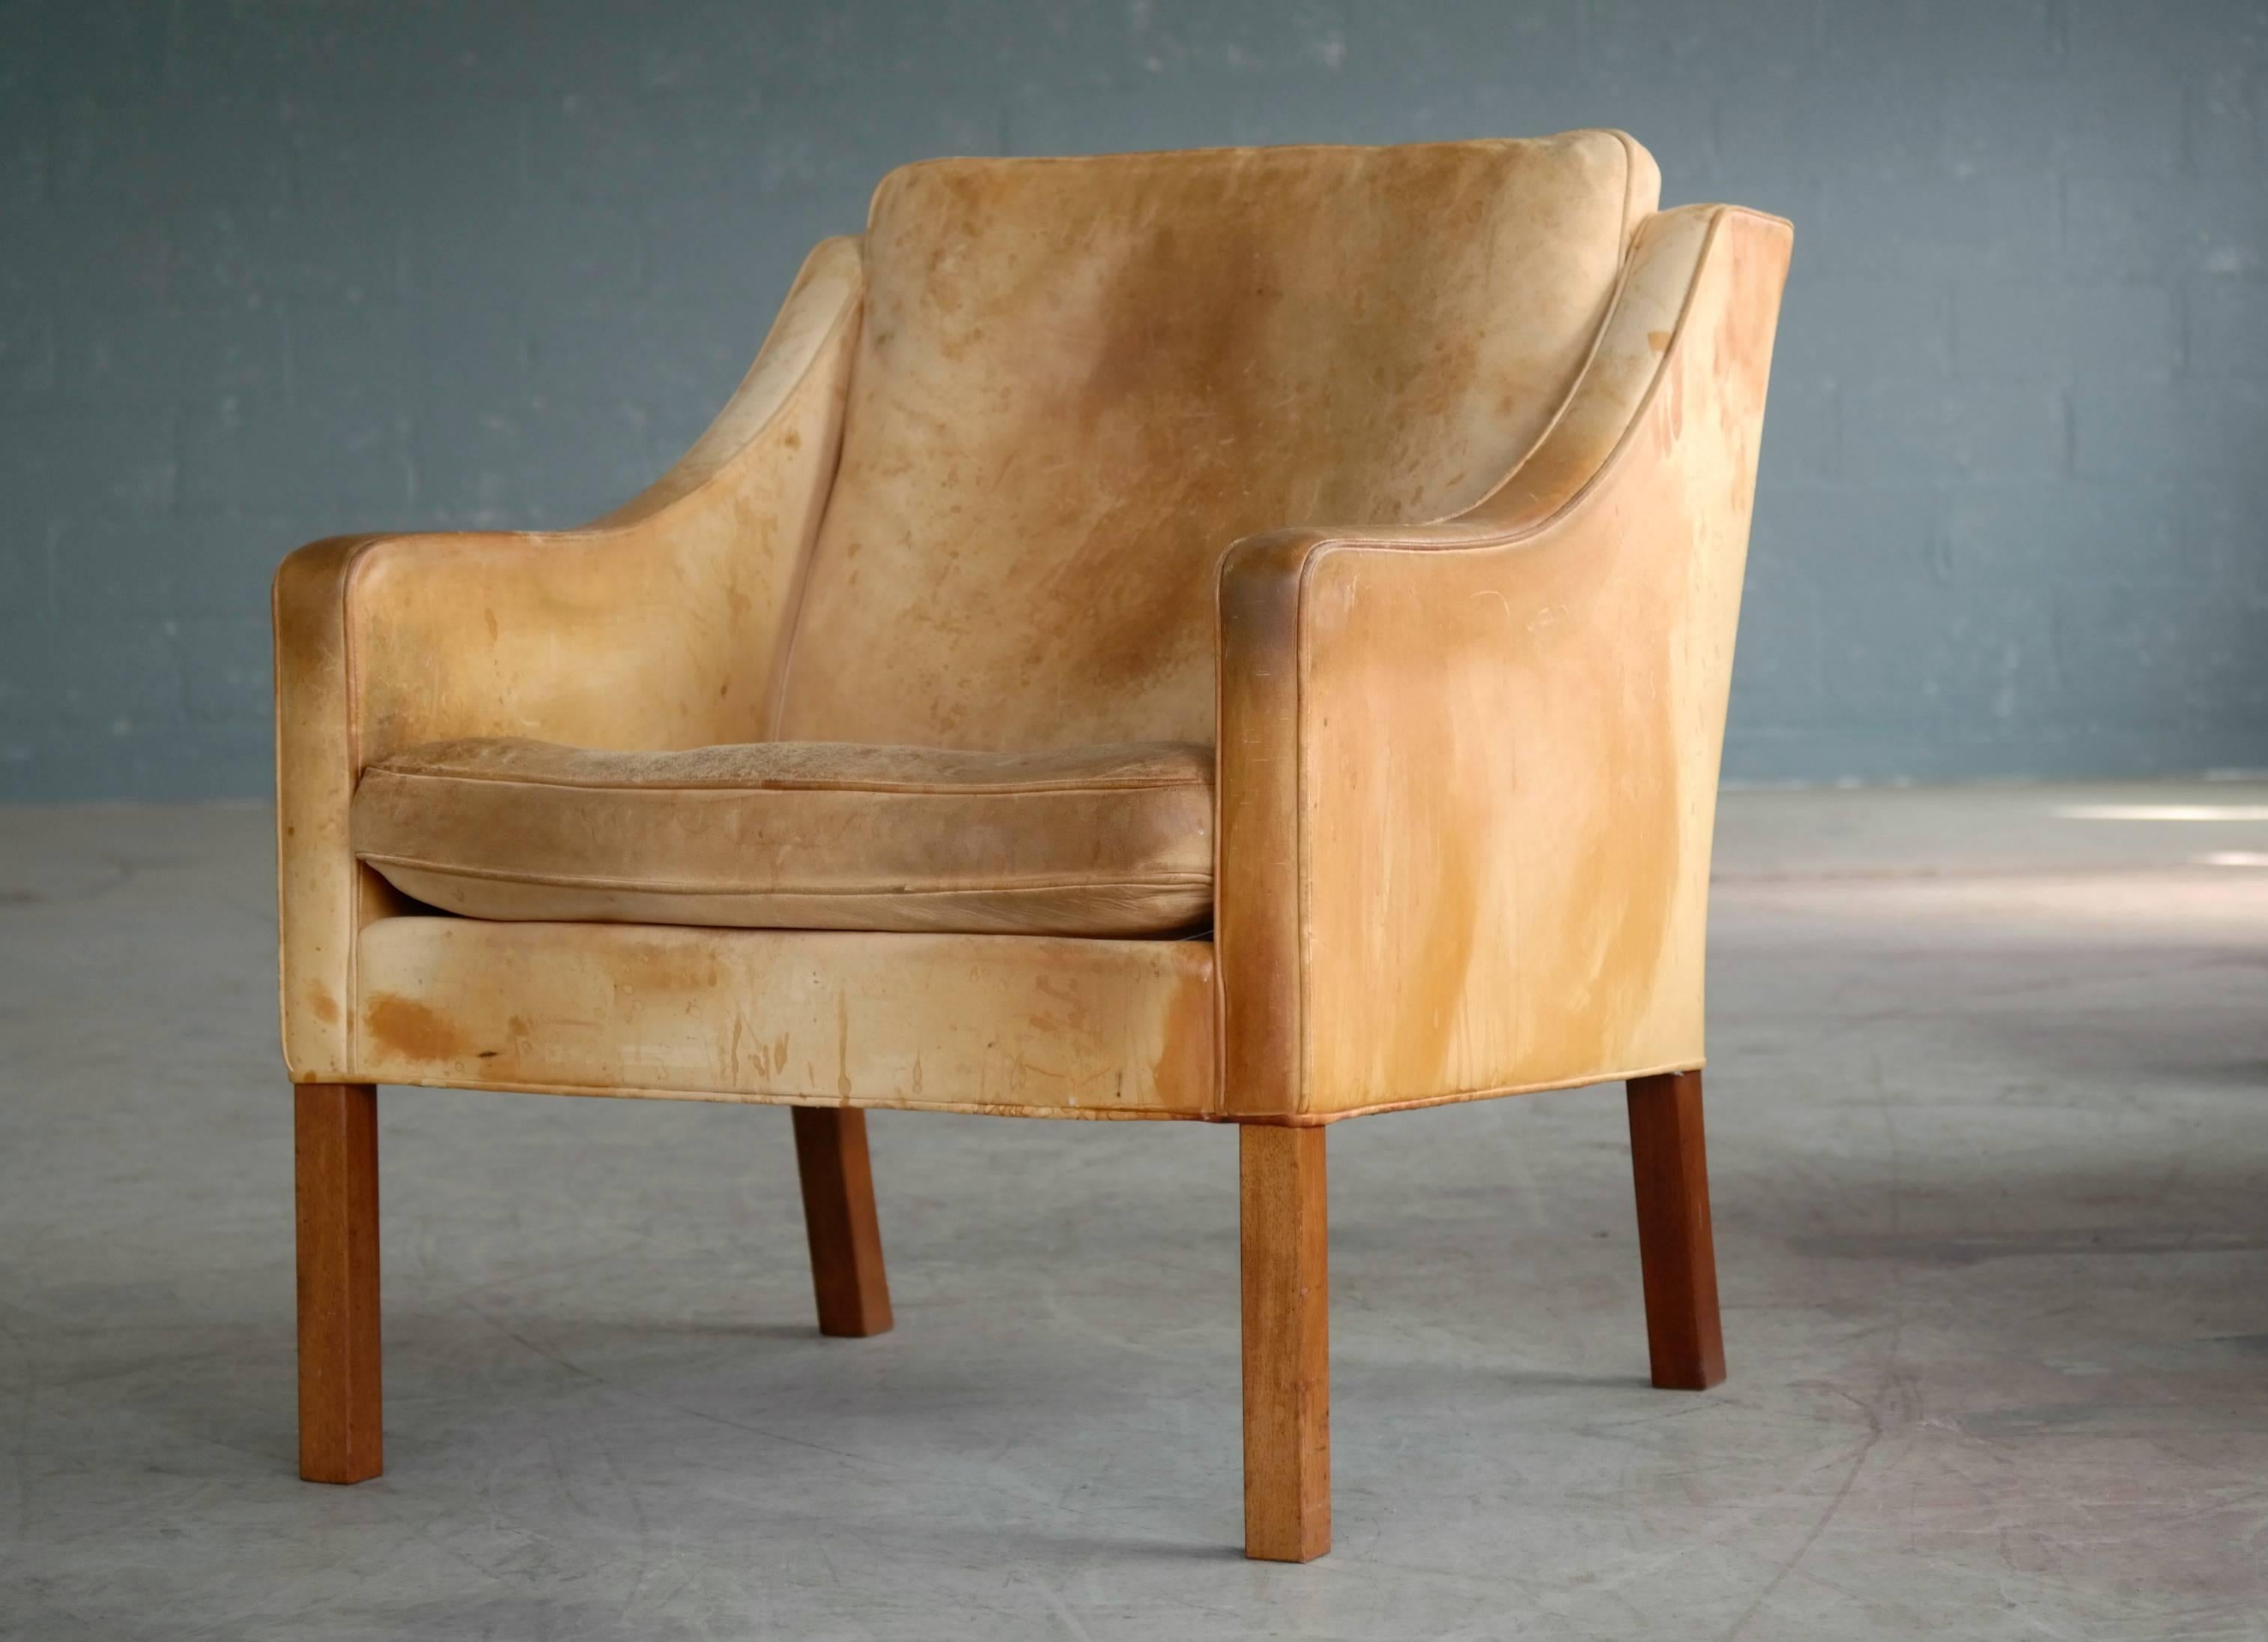 Mid-20th Century Børge Mogensen Model 2207 Lounge Chair in Butterscotch Leather for Fredericia